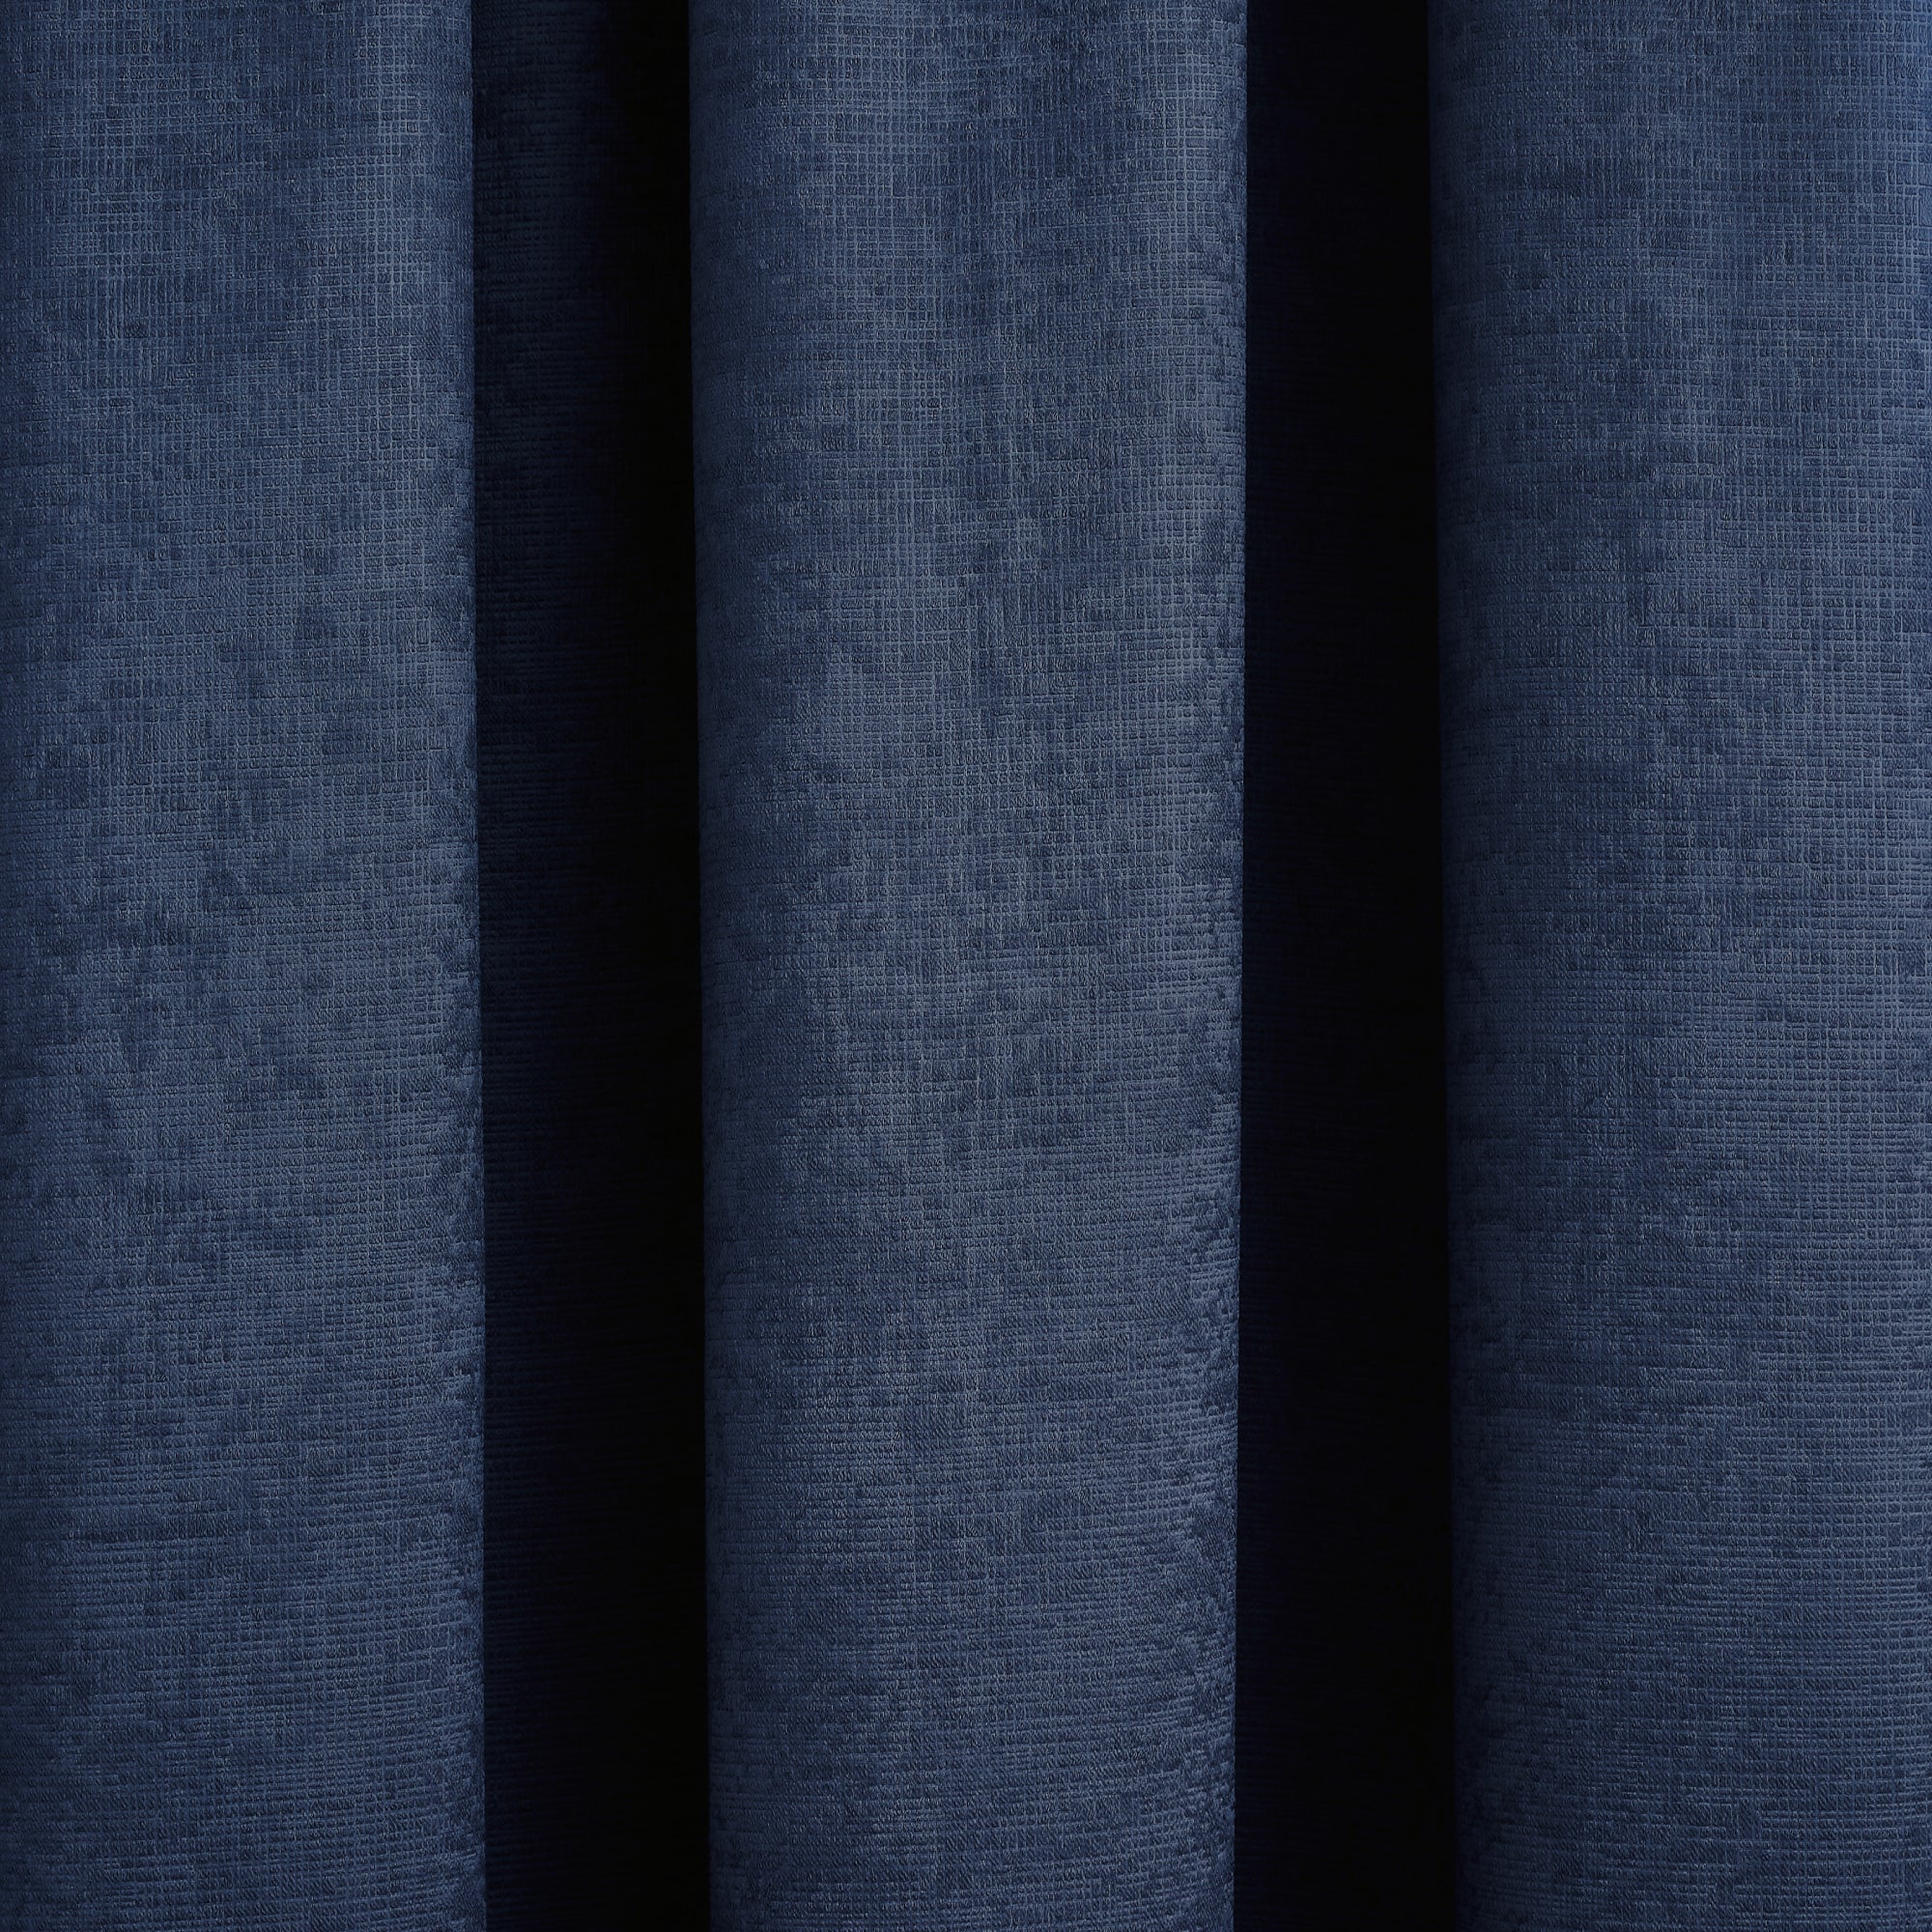 Pair of Pencil Pleat Curtains Galaxy by Fusion in Navy